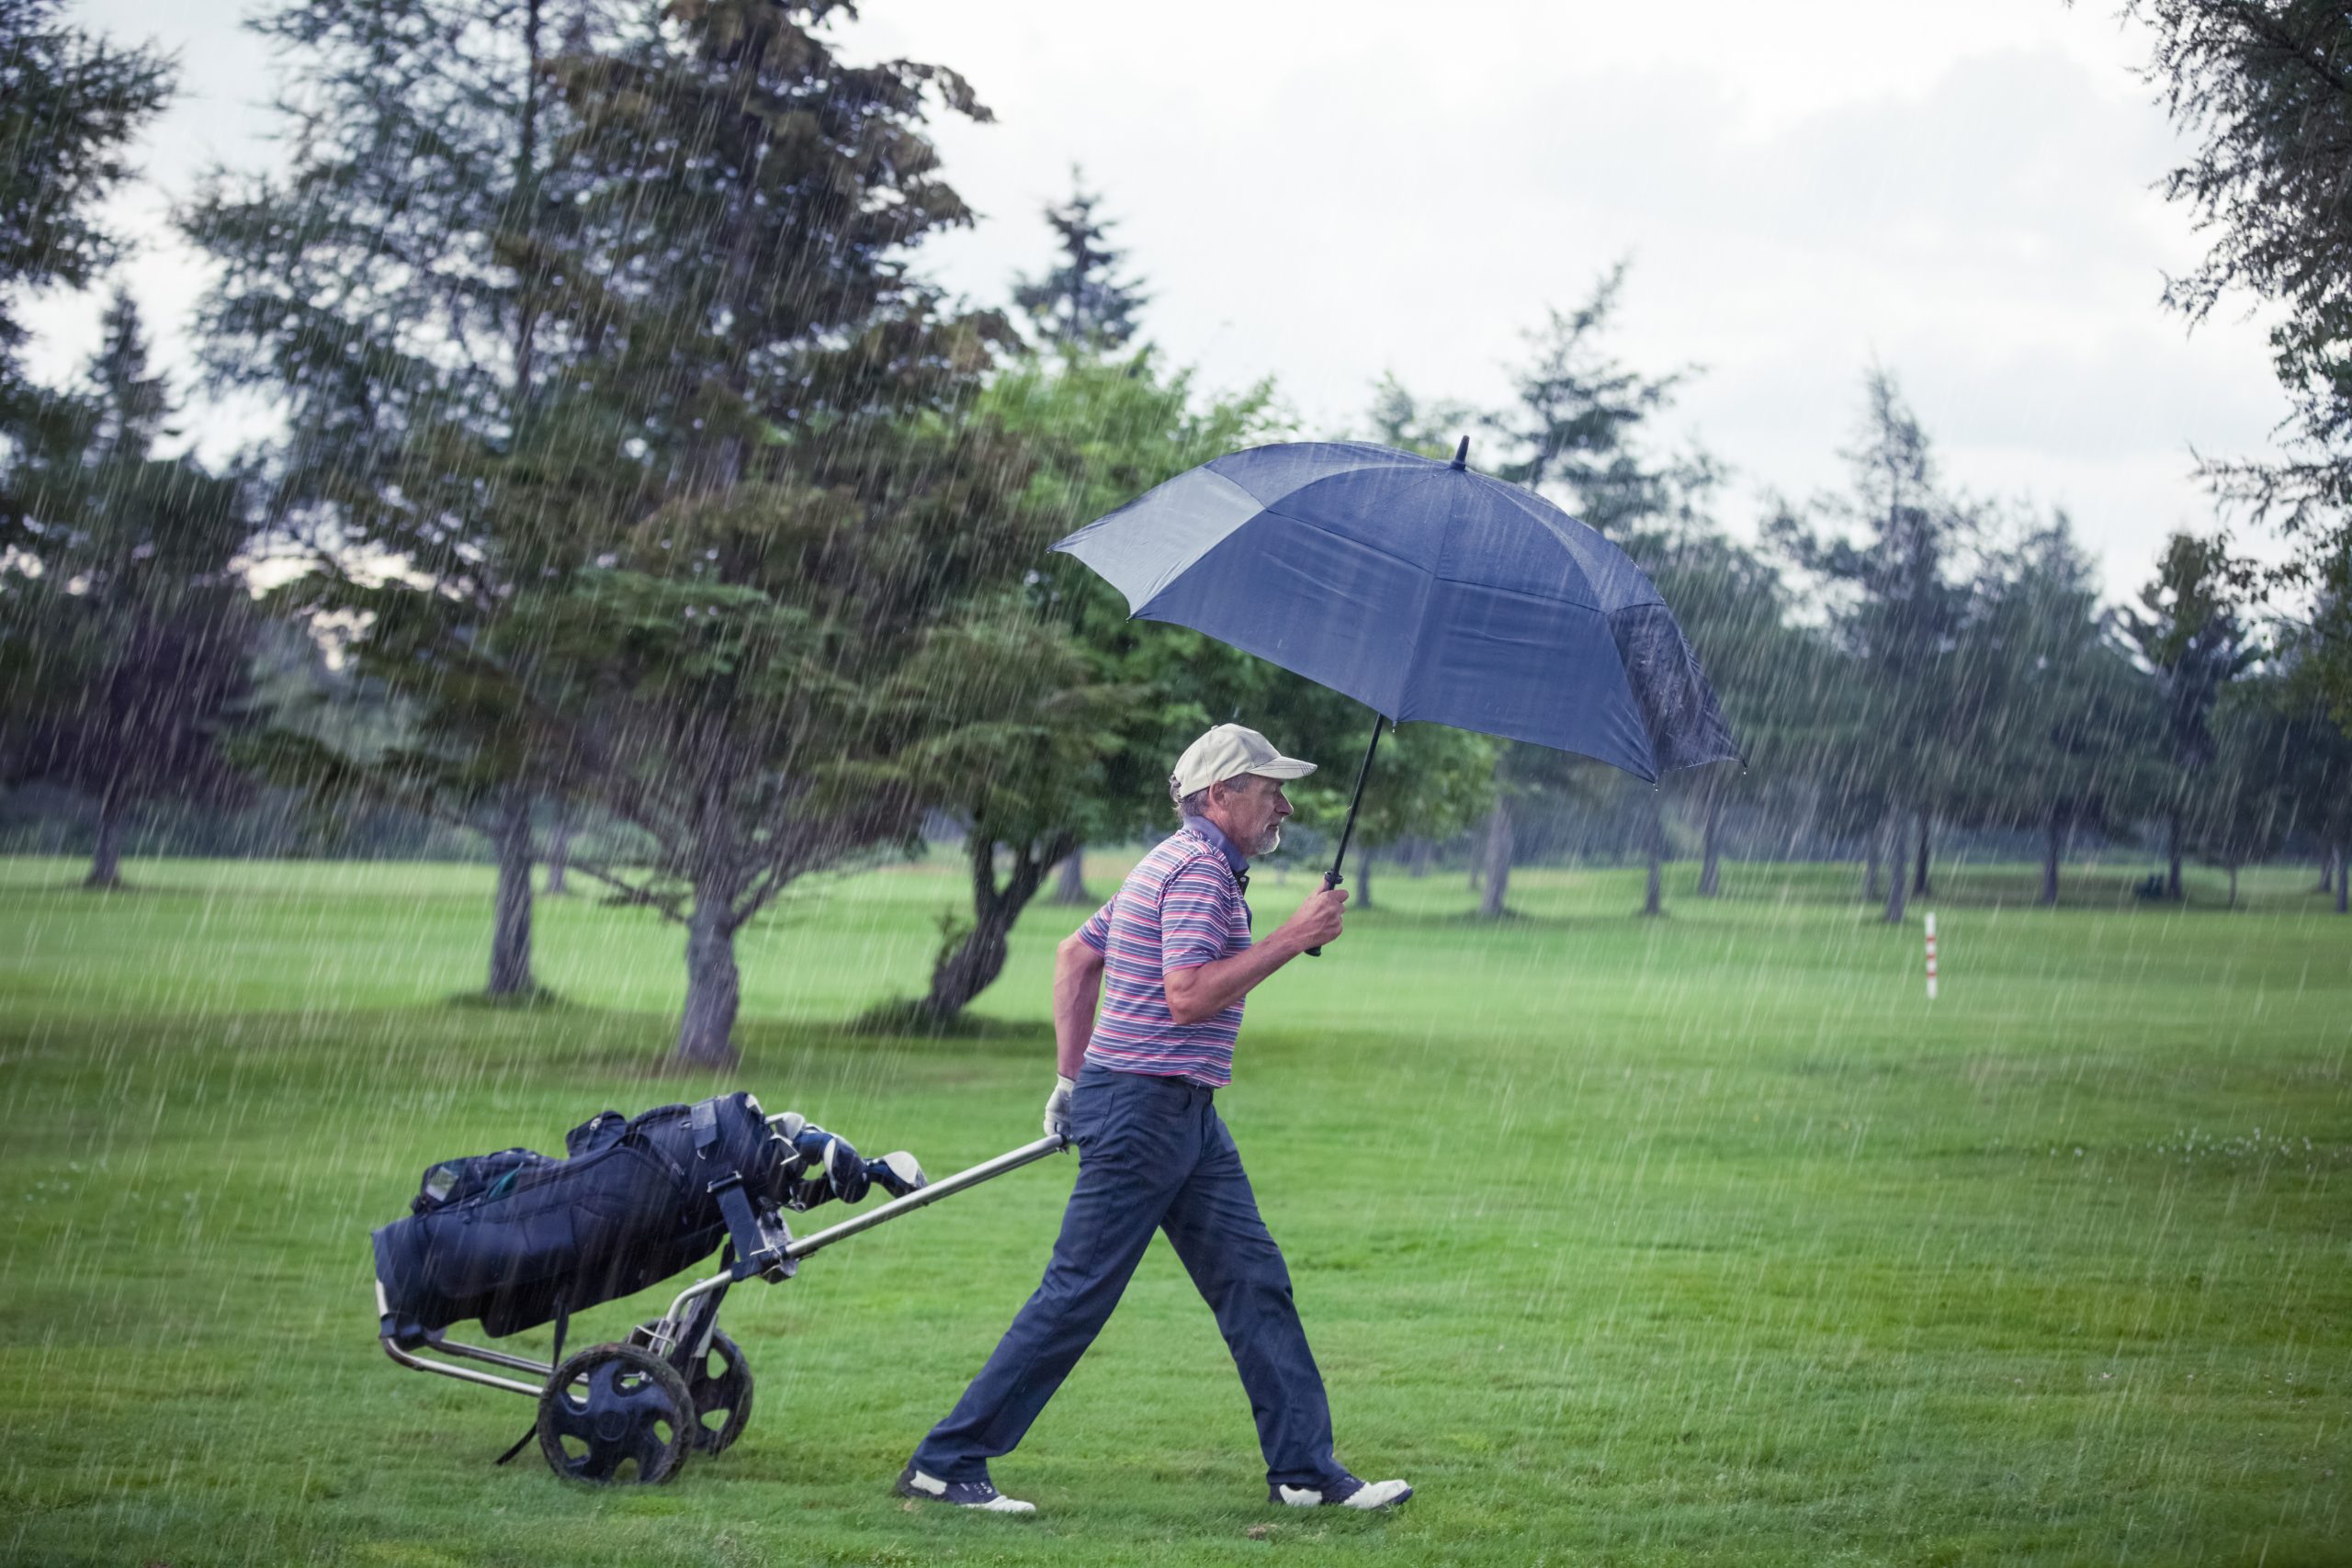 golfer on a rainy day leaving the golf course PNSA86D scaled